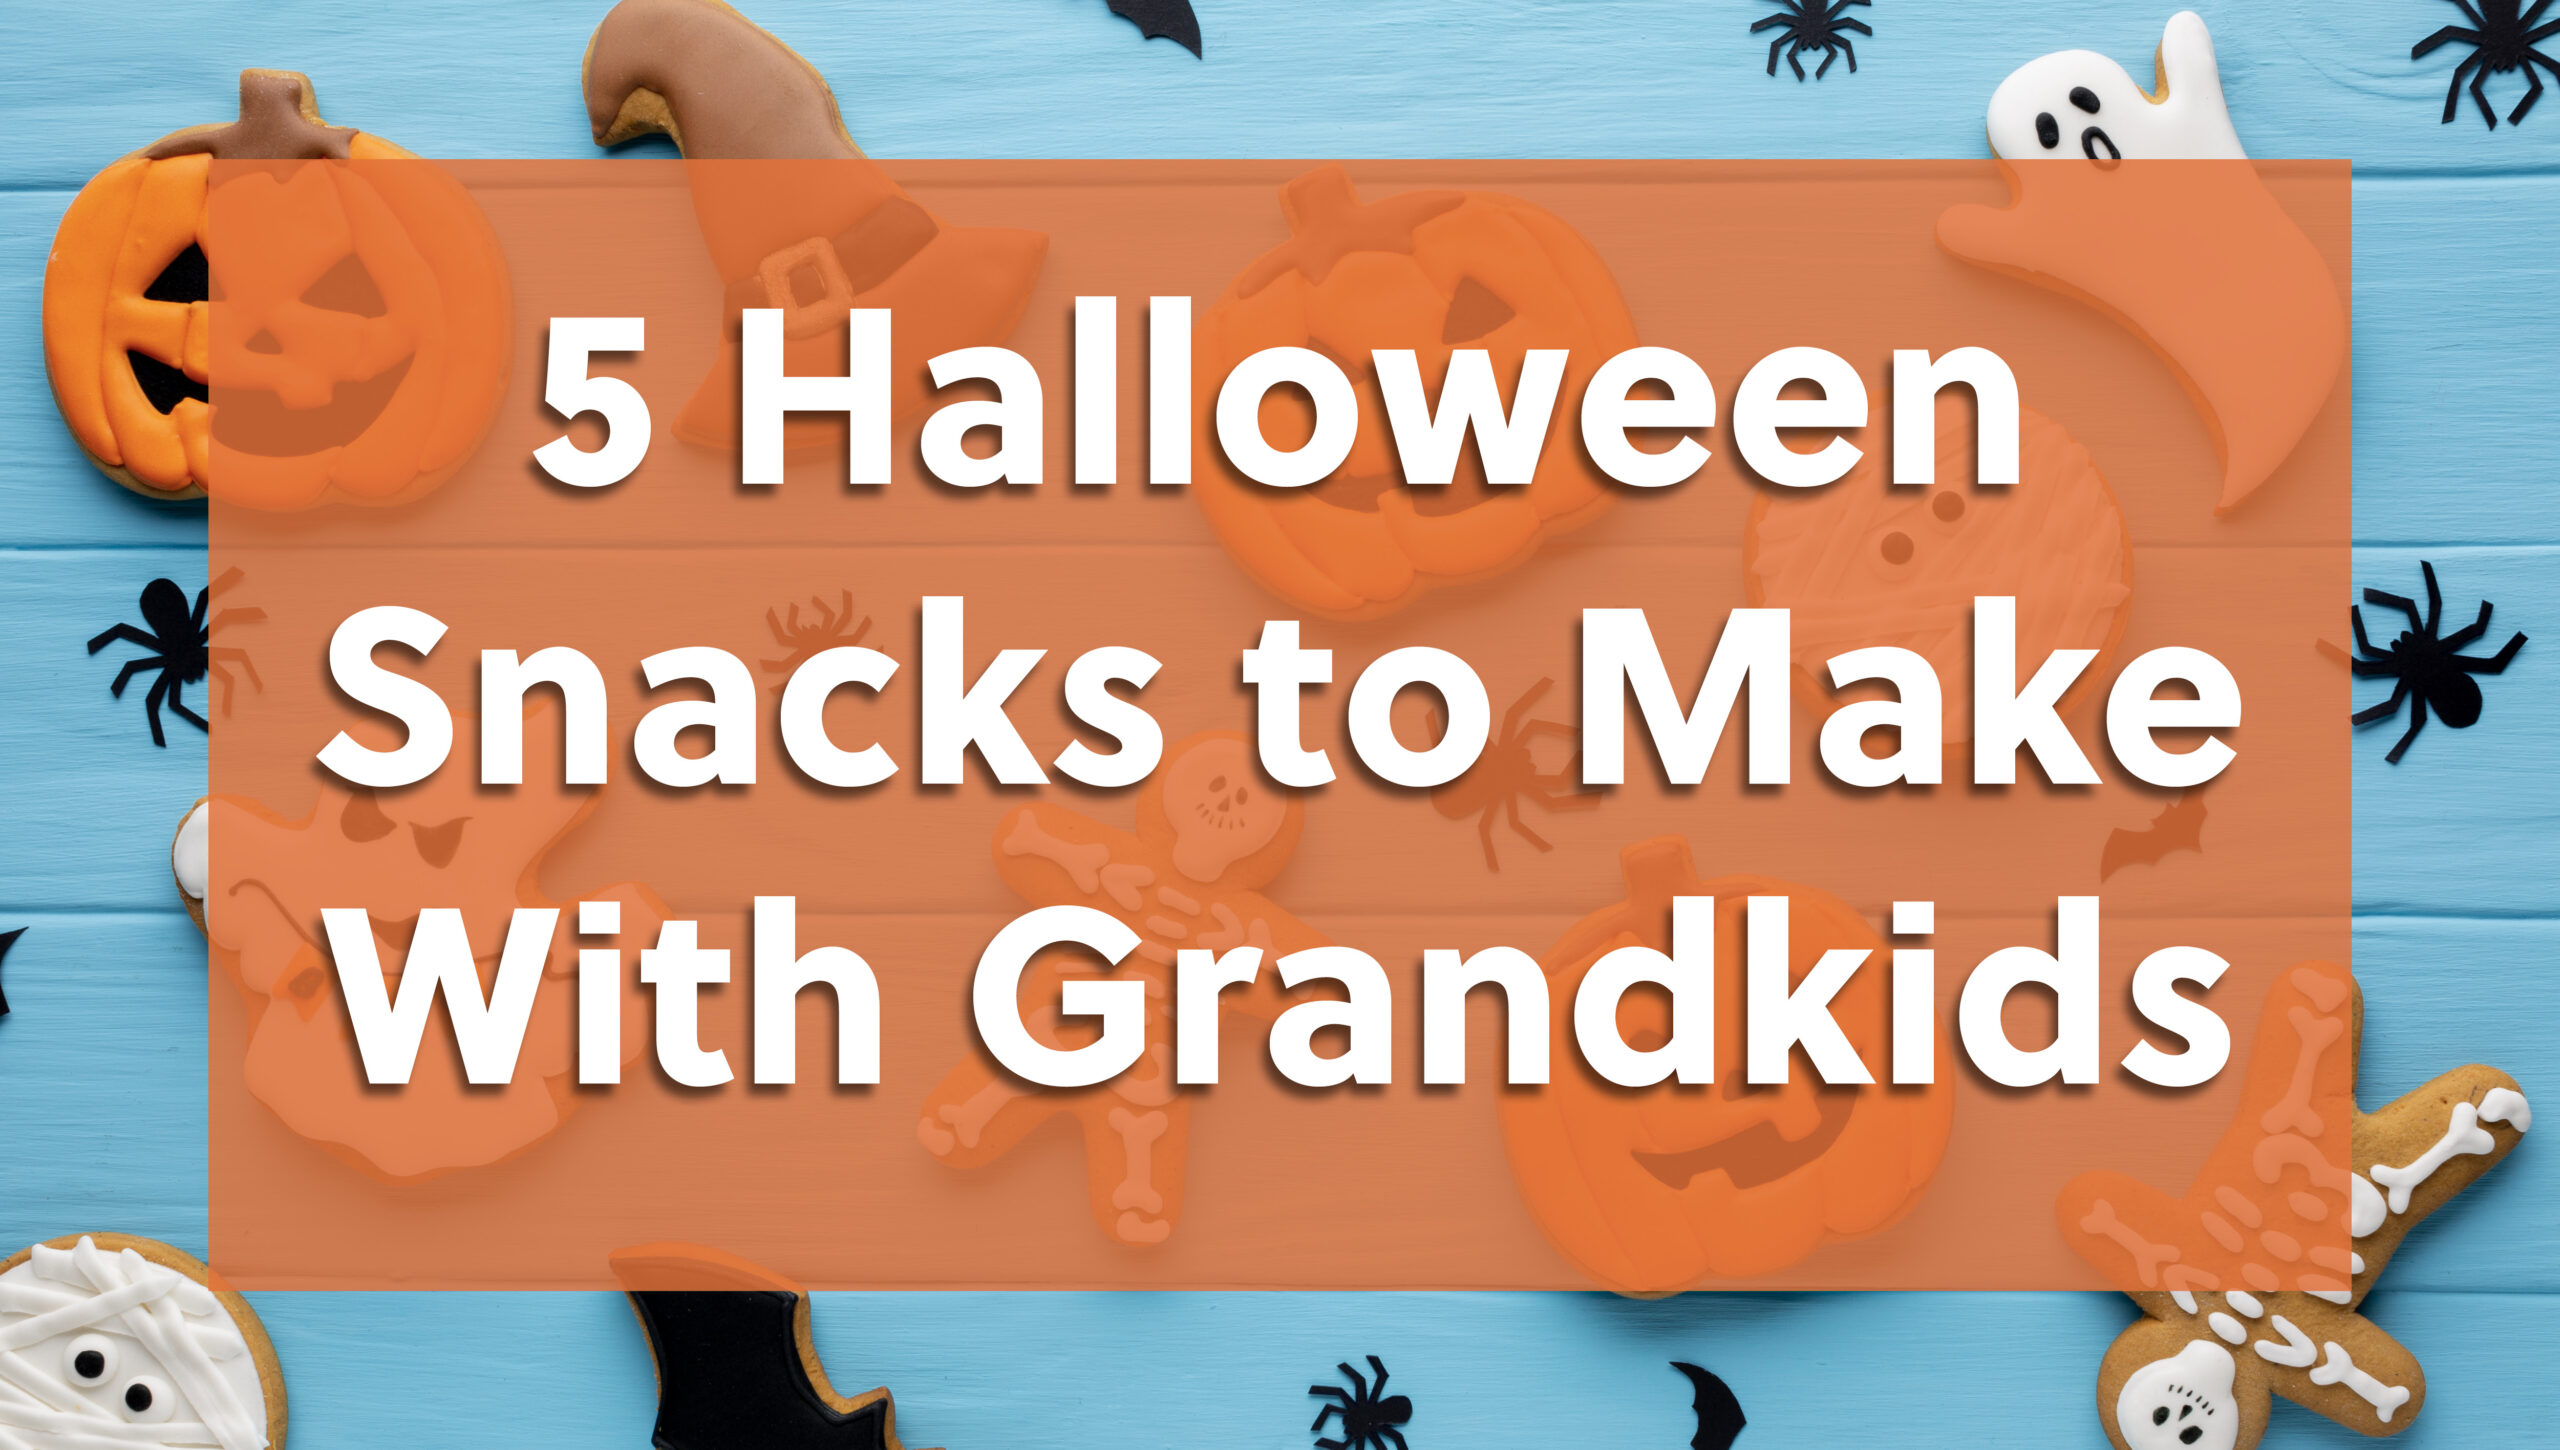 5 Halloween Themed Snacks to Make With Your Grandkids